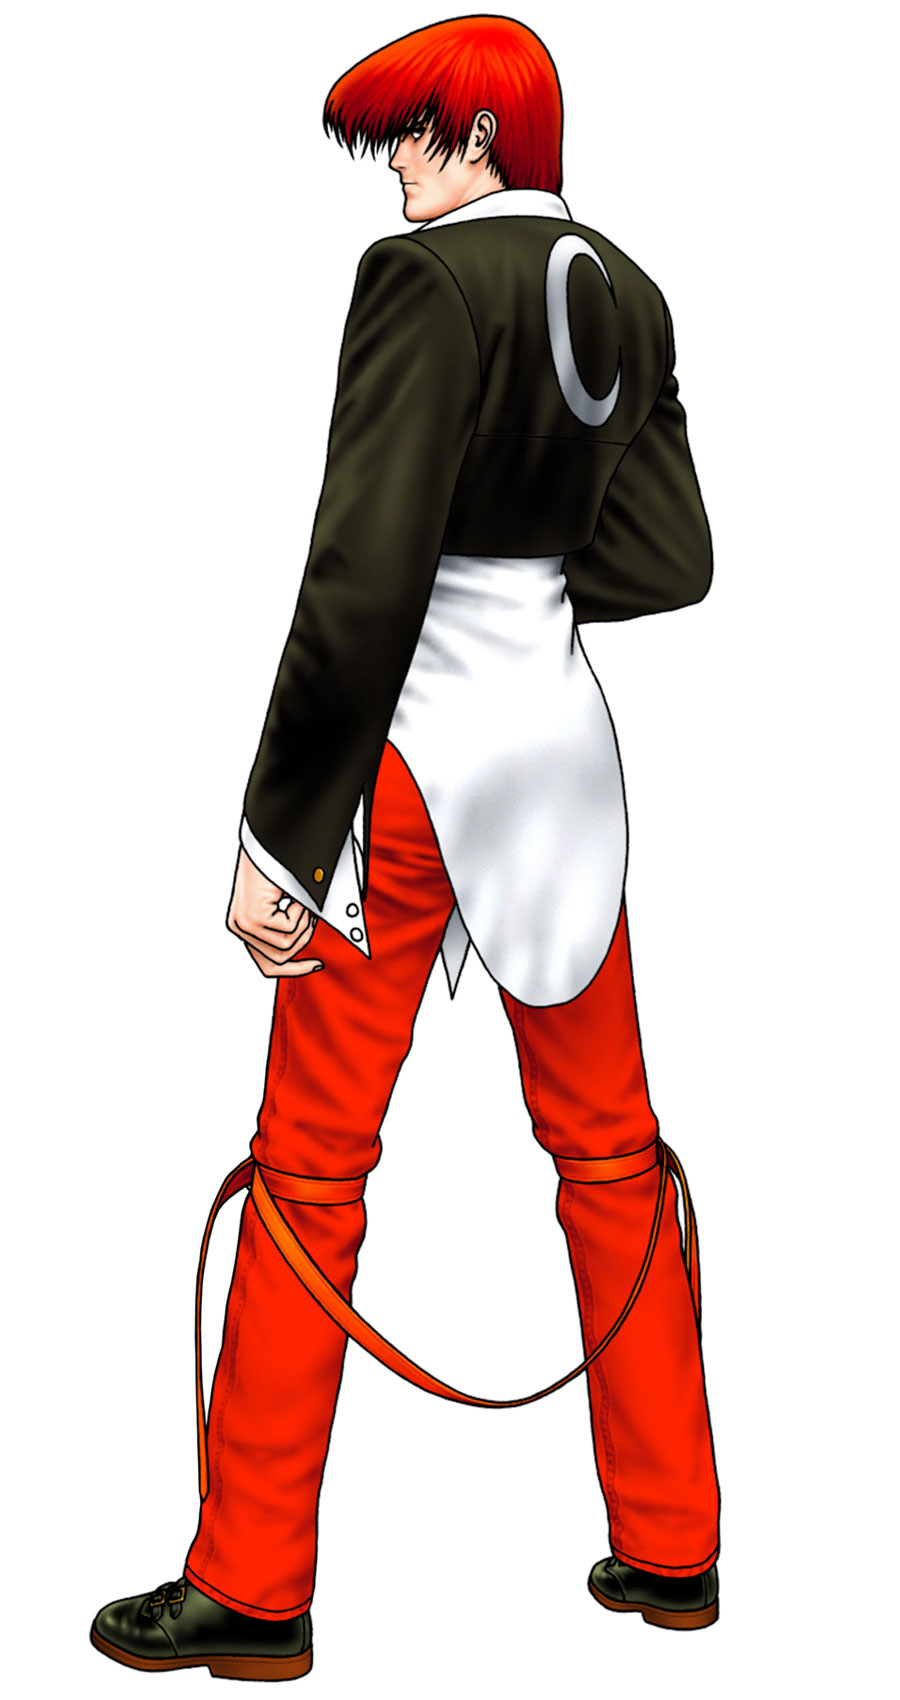 Iori Yagami from the King of Fighters Series